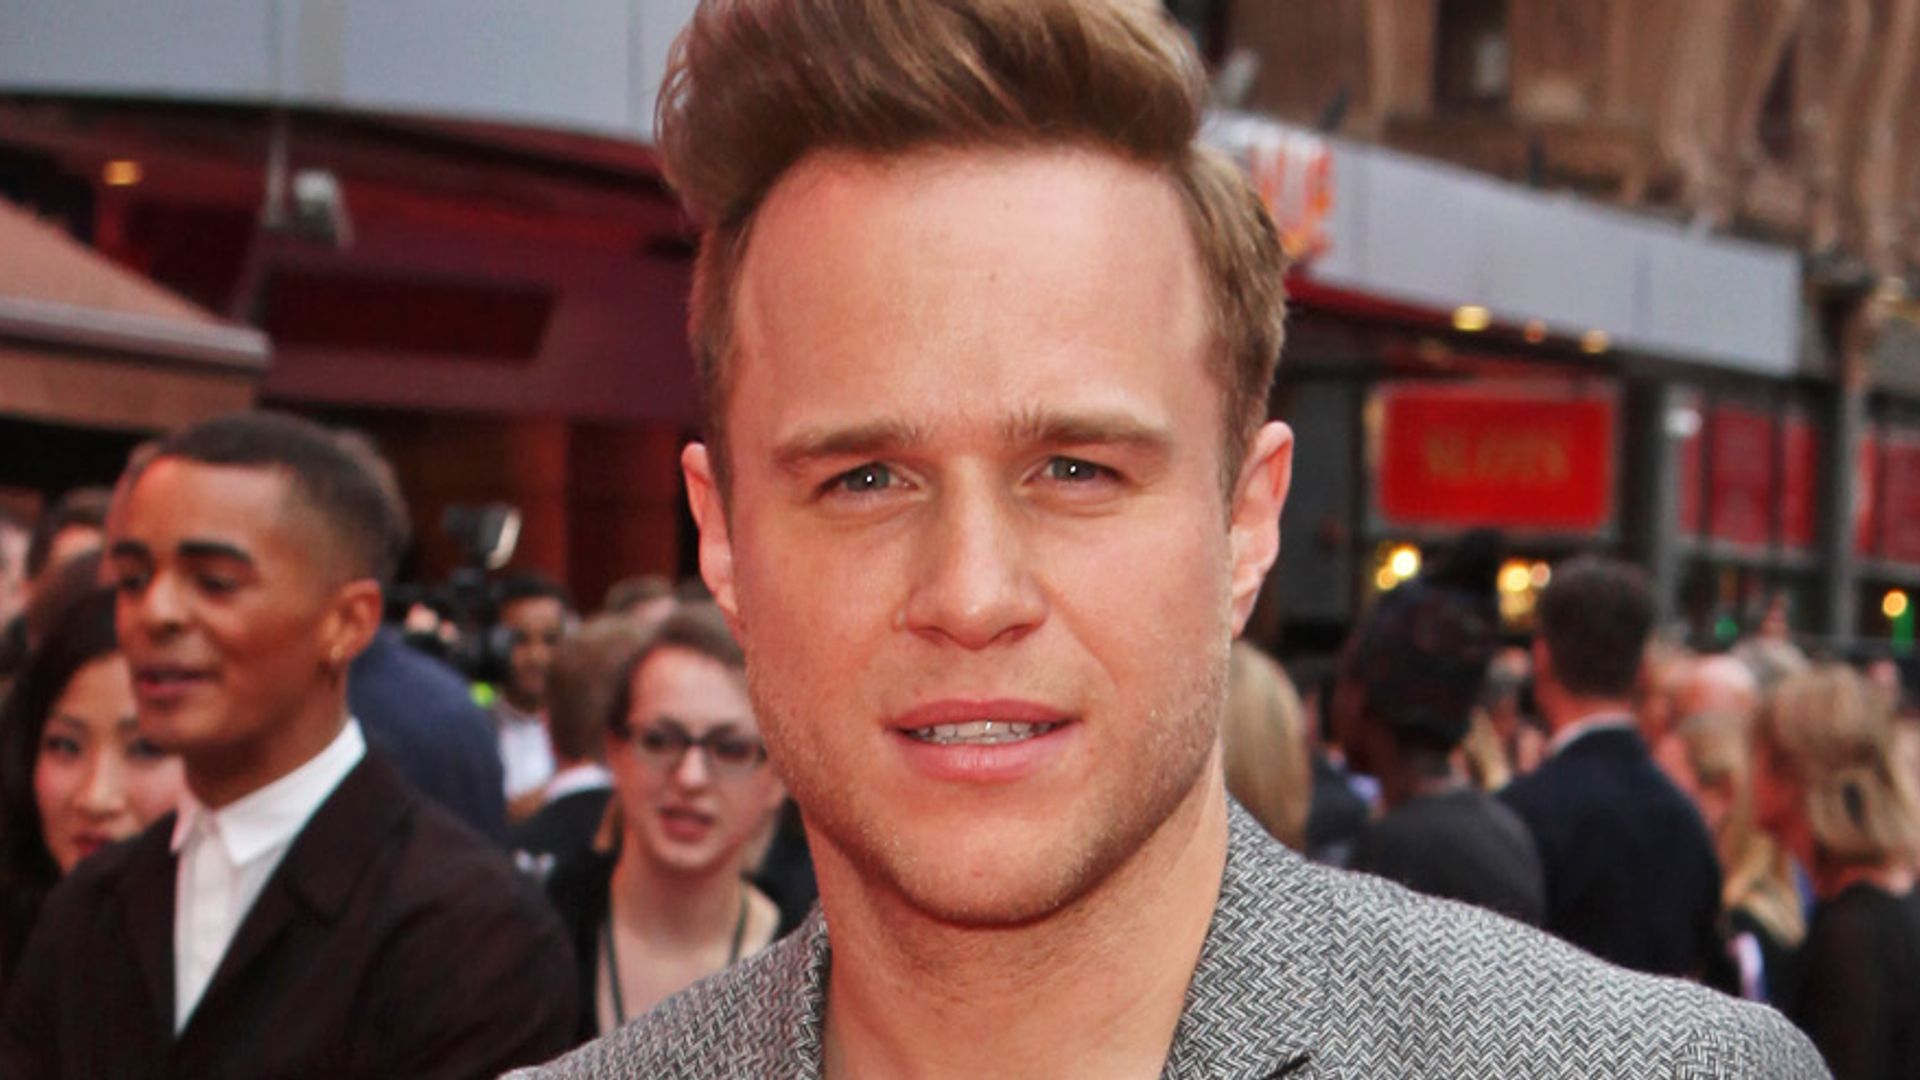 Olly Murs in a grey suit on the red carpet